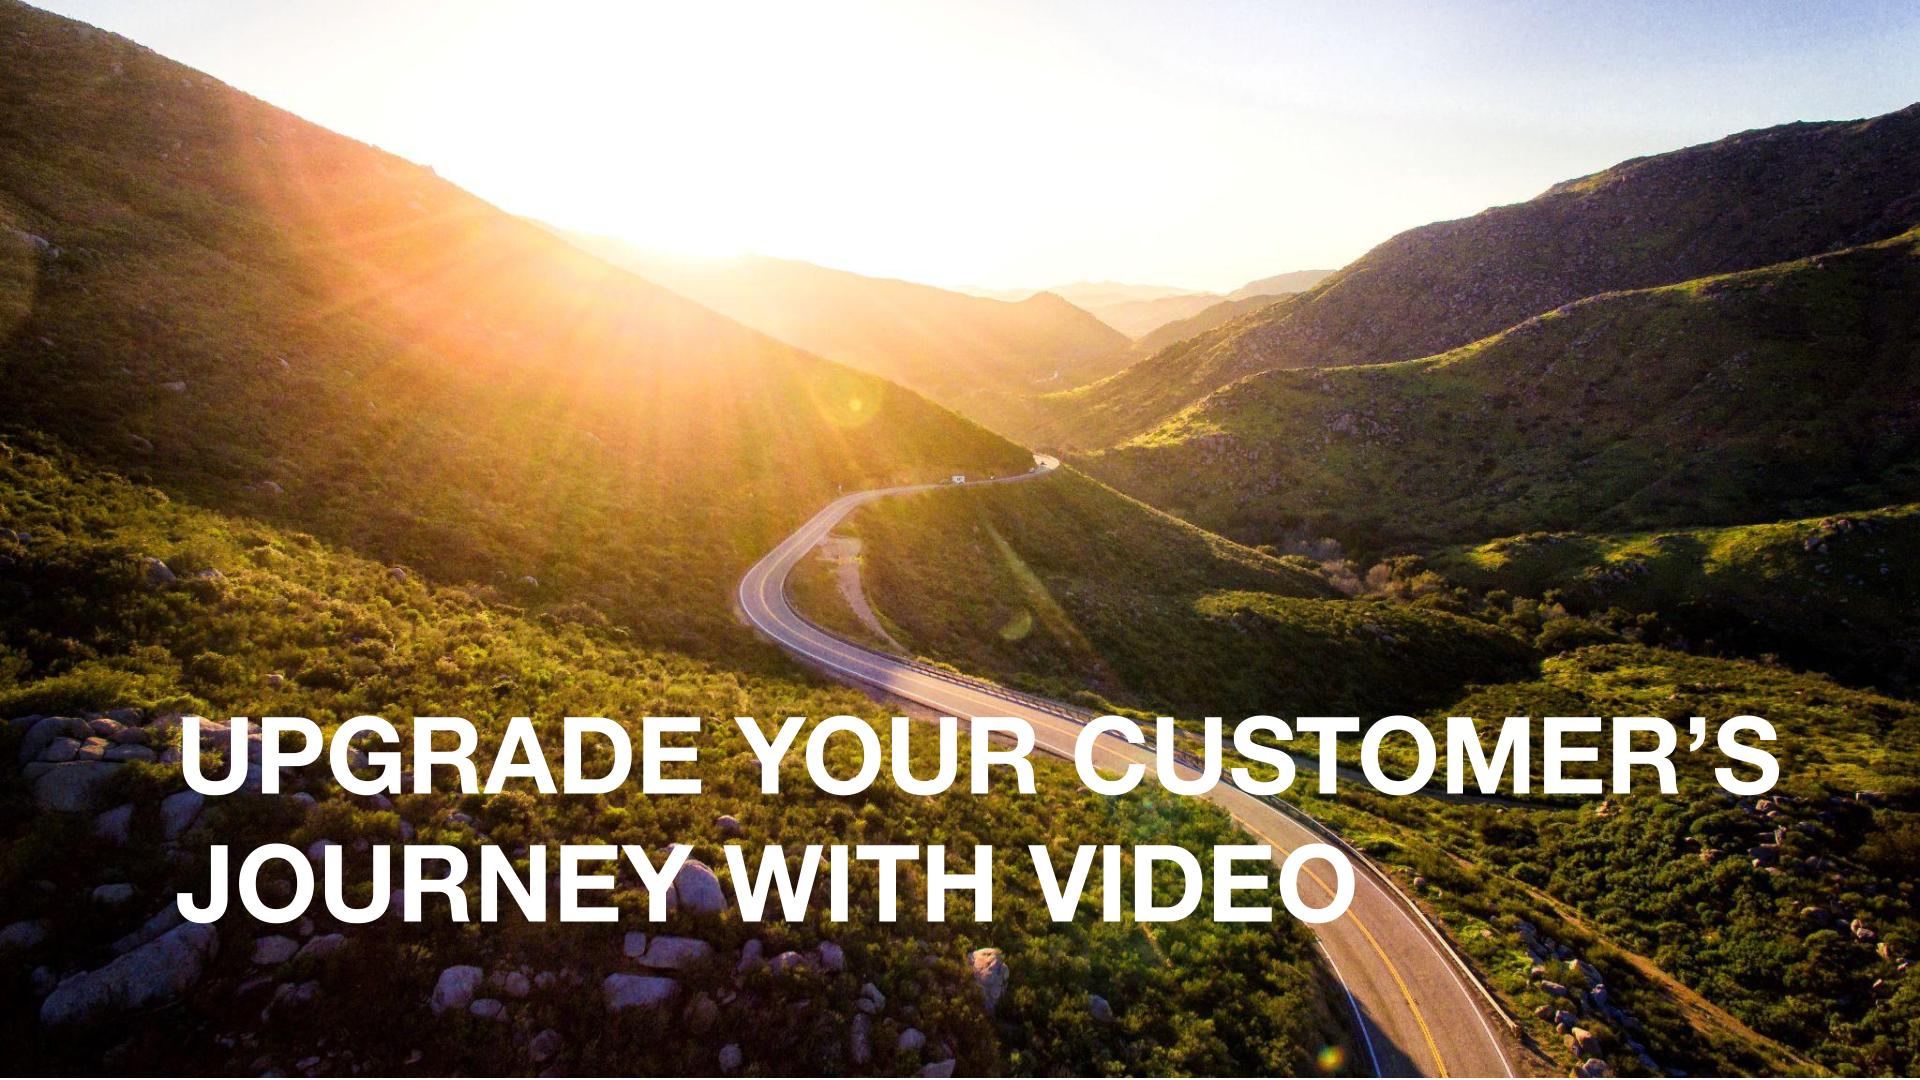 Upgrade your customer's journey with video